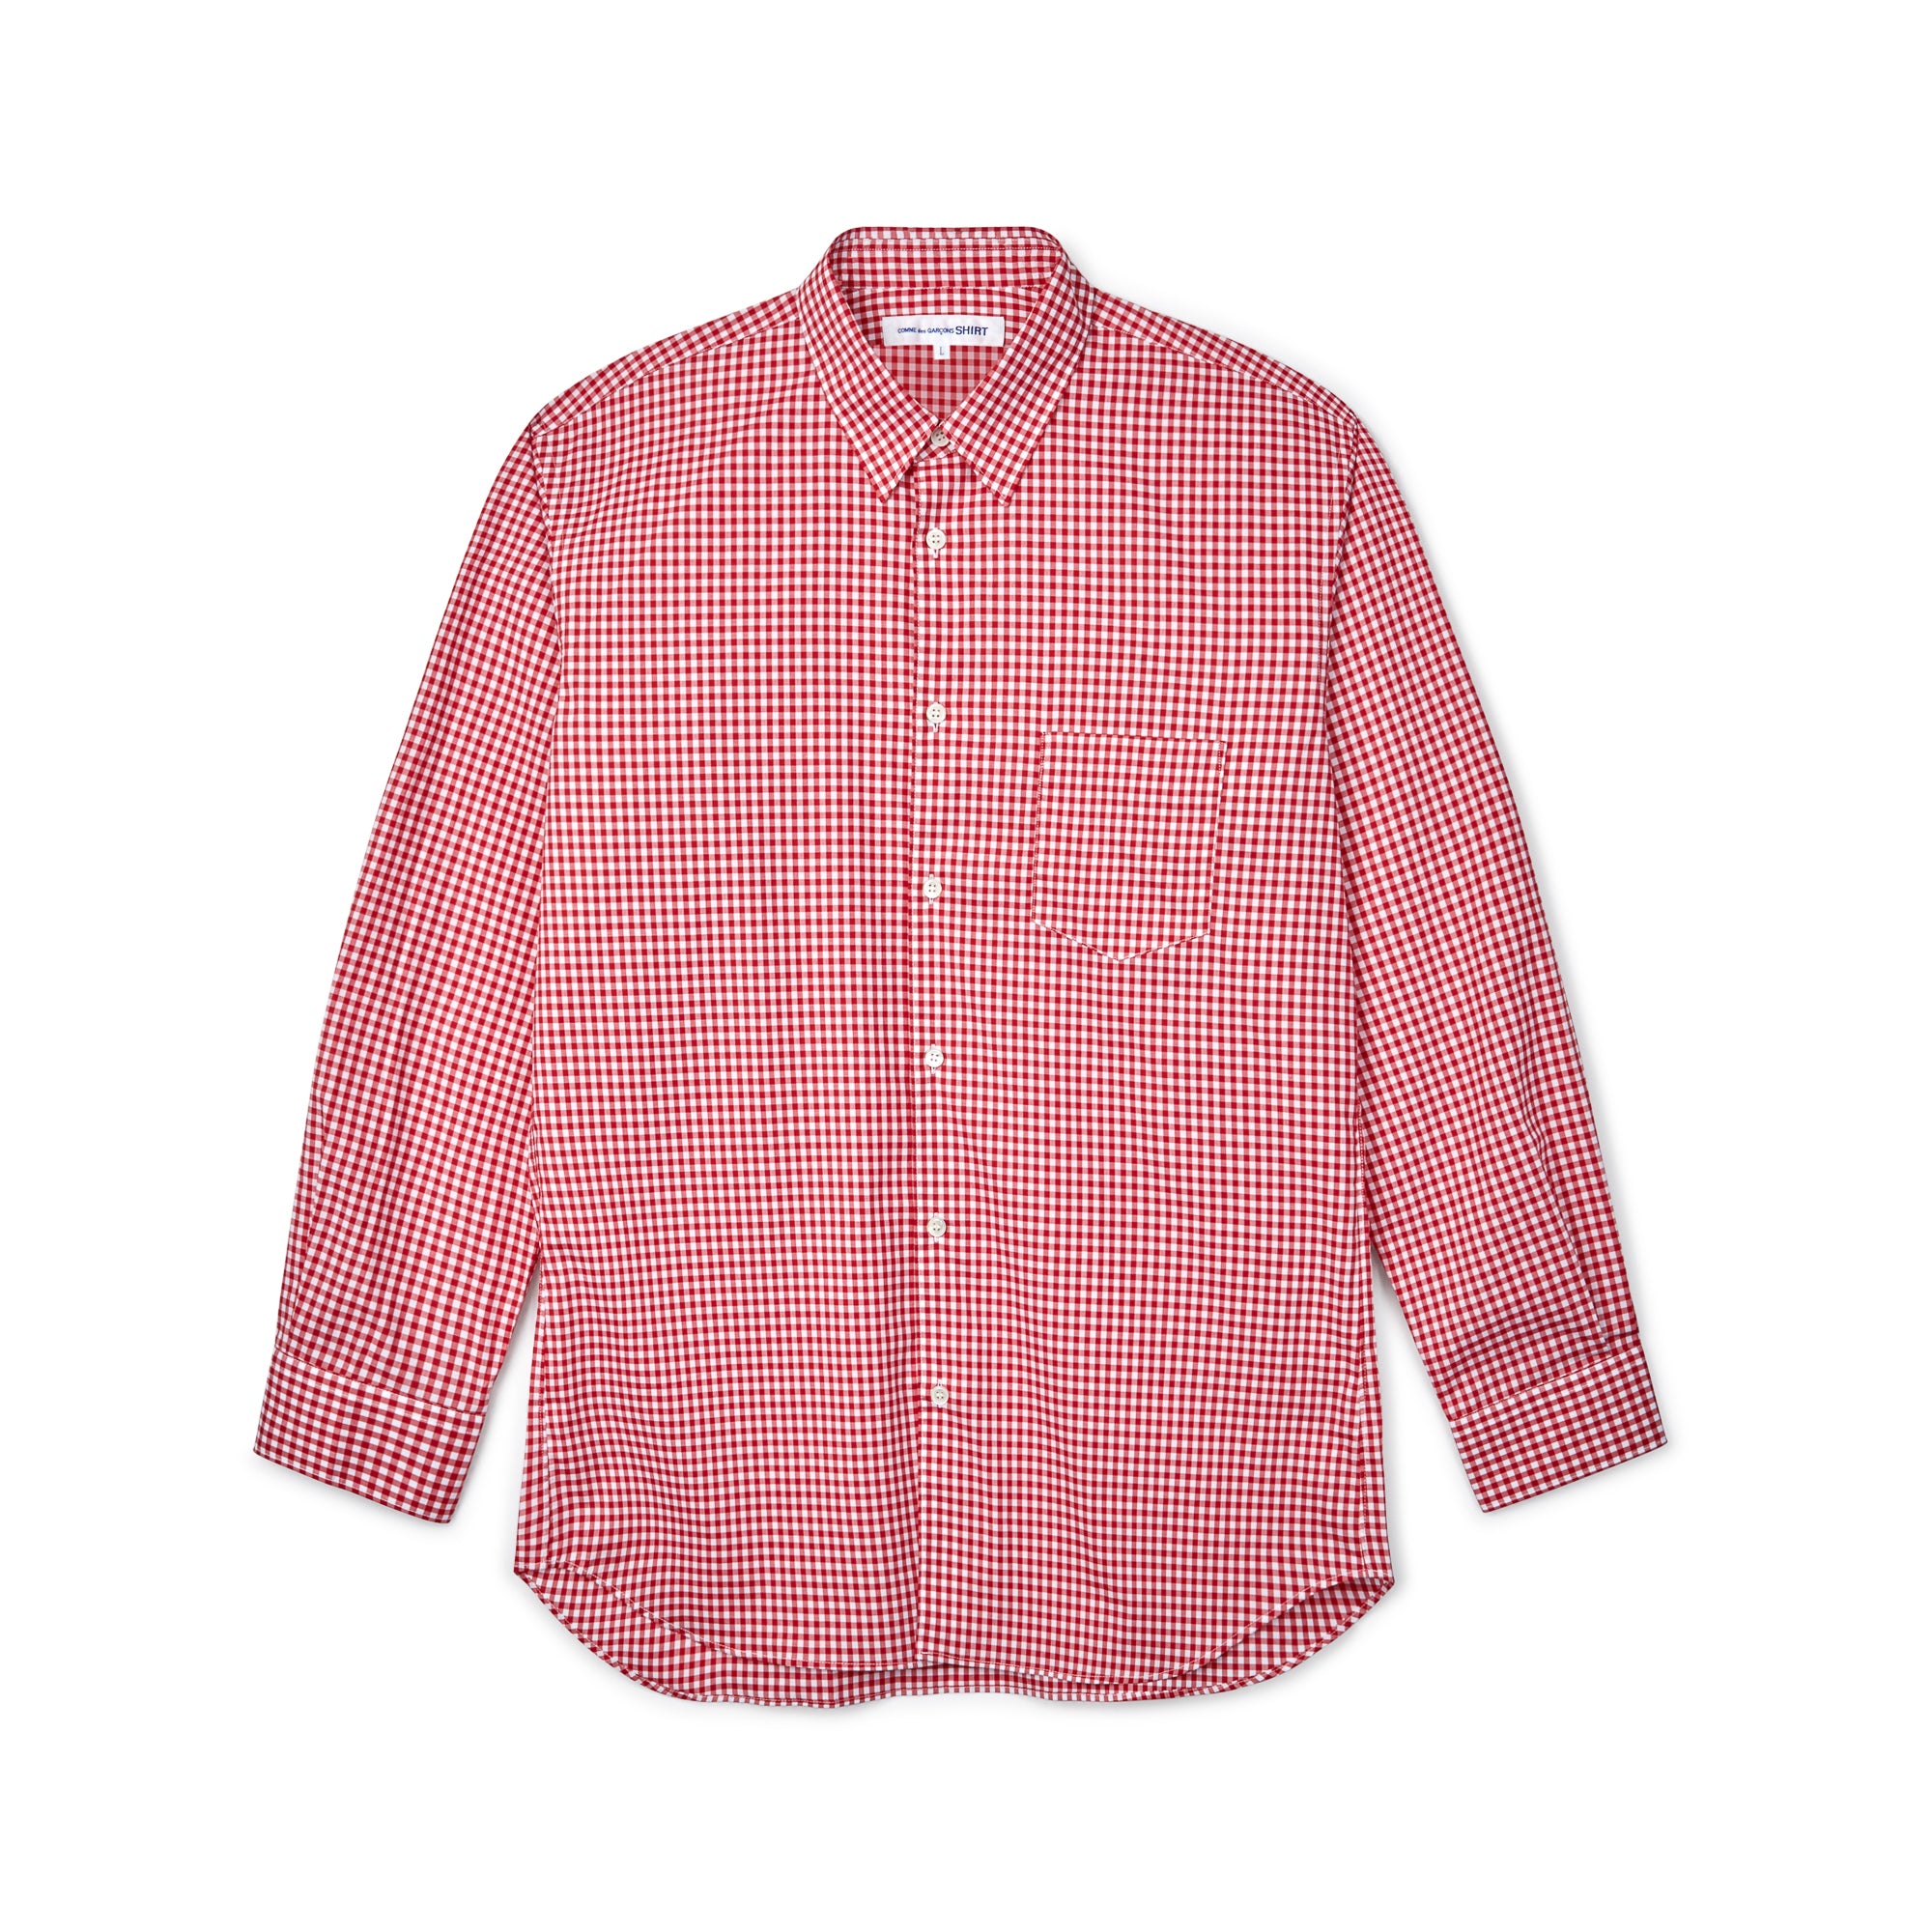 CDG Shirt Forever - Classic Fit Checked Shirt - (Red) view 5